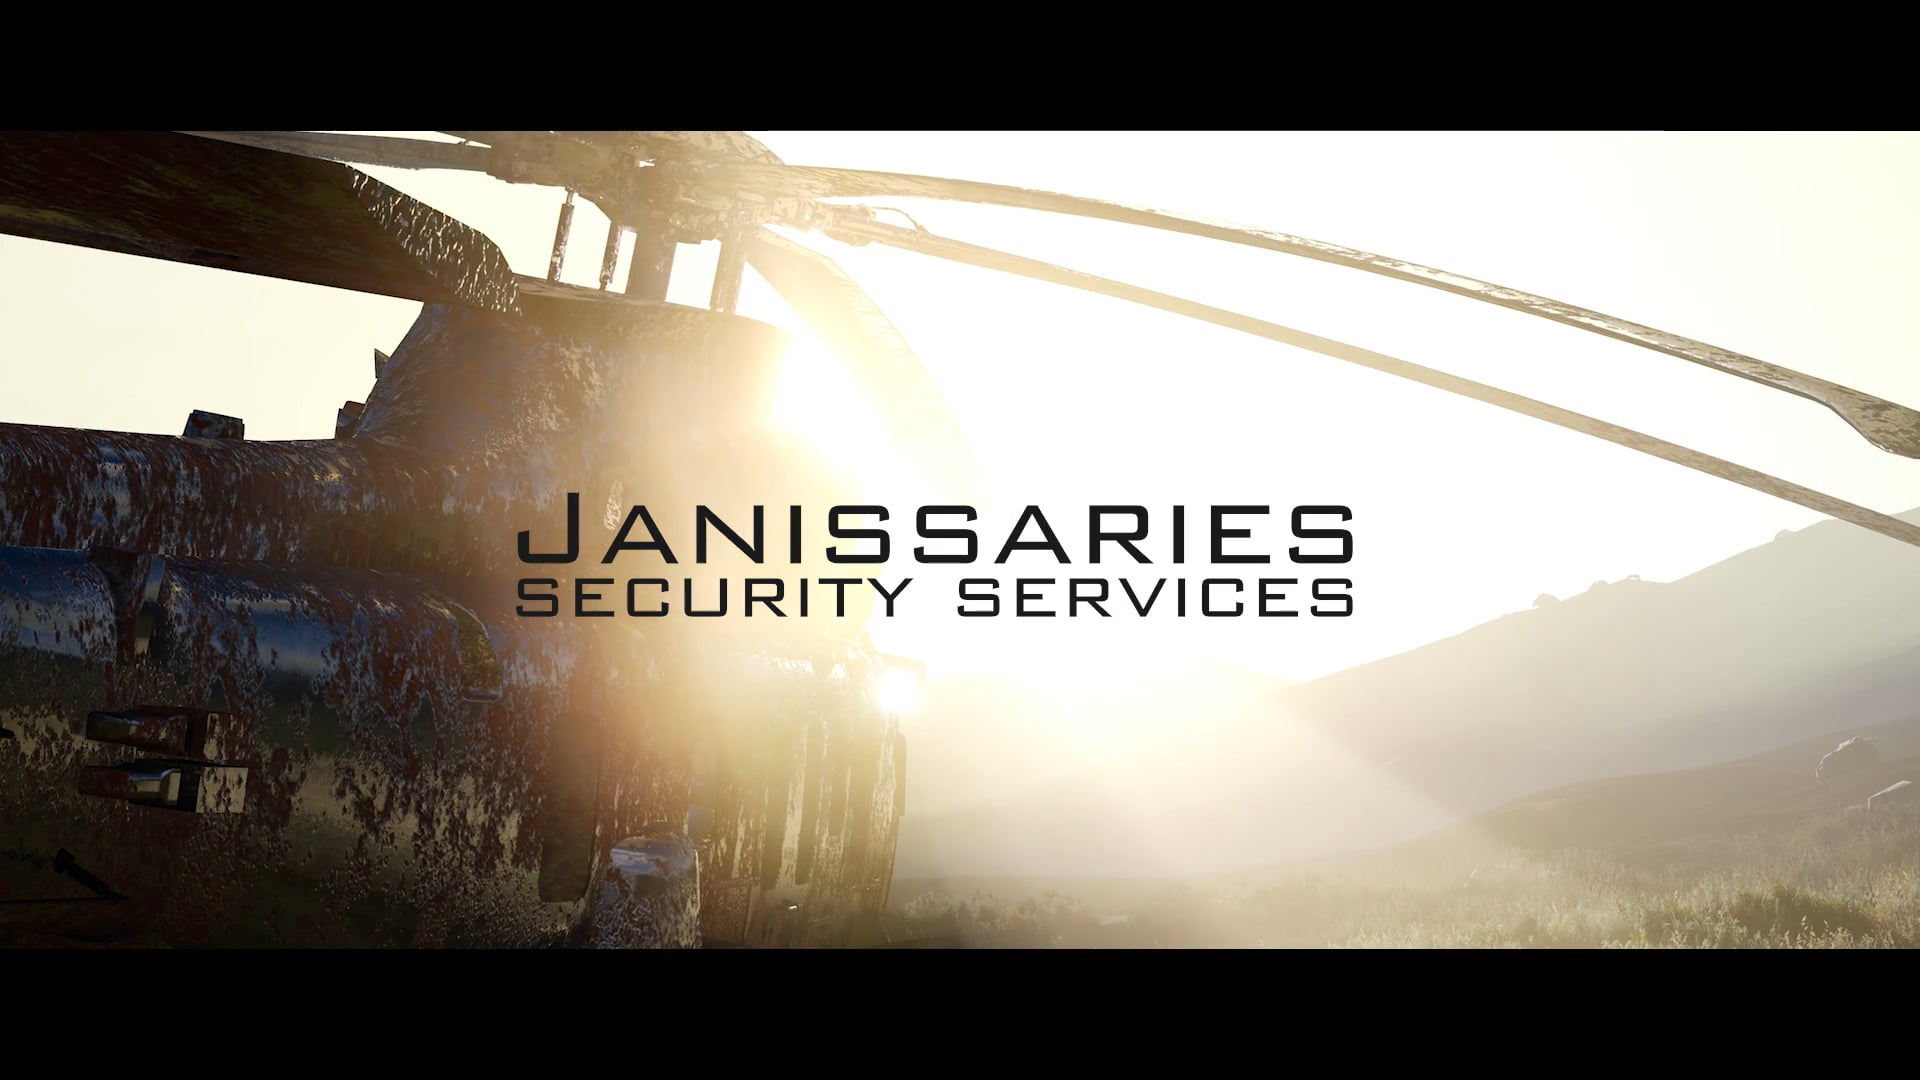 Janissaries Security Services: Commercial Film